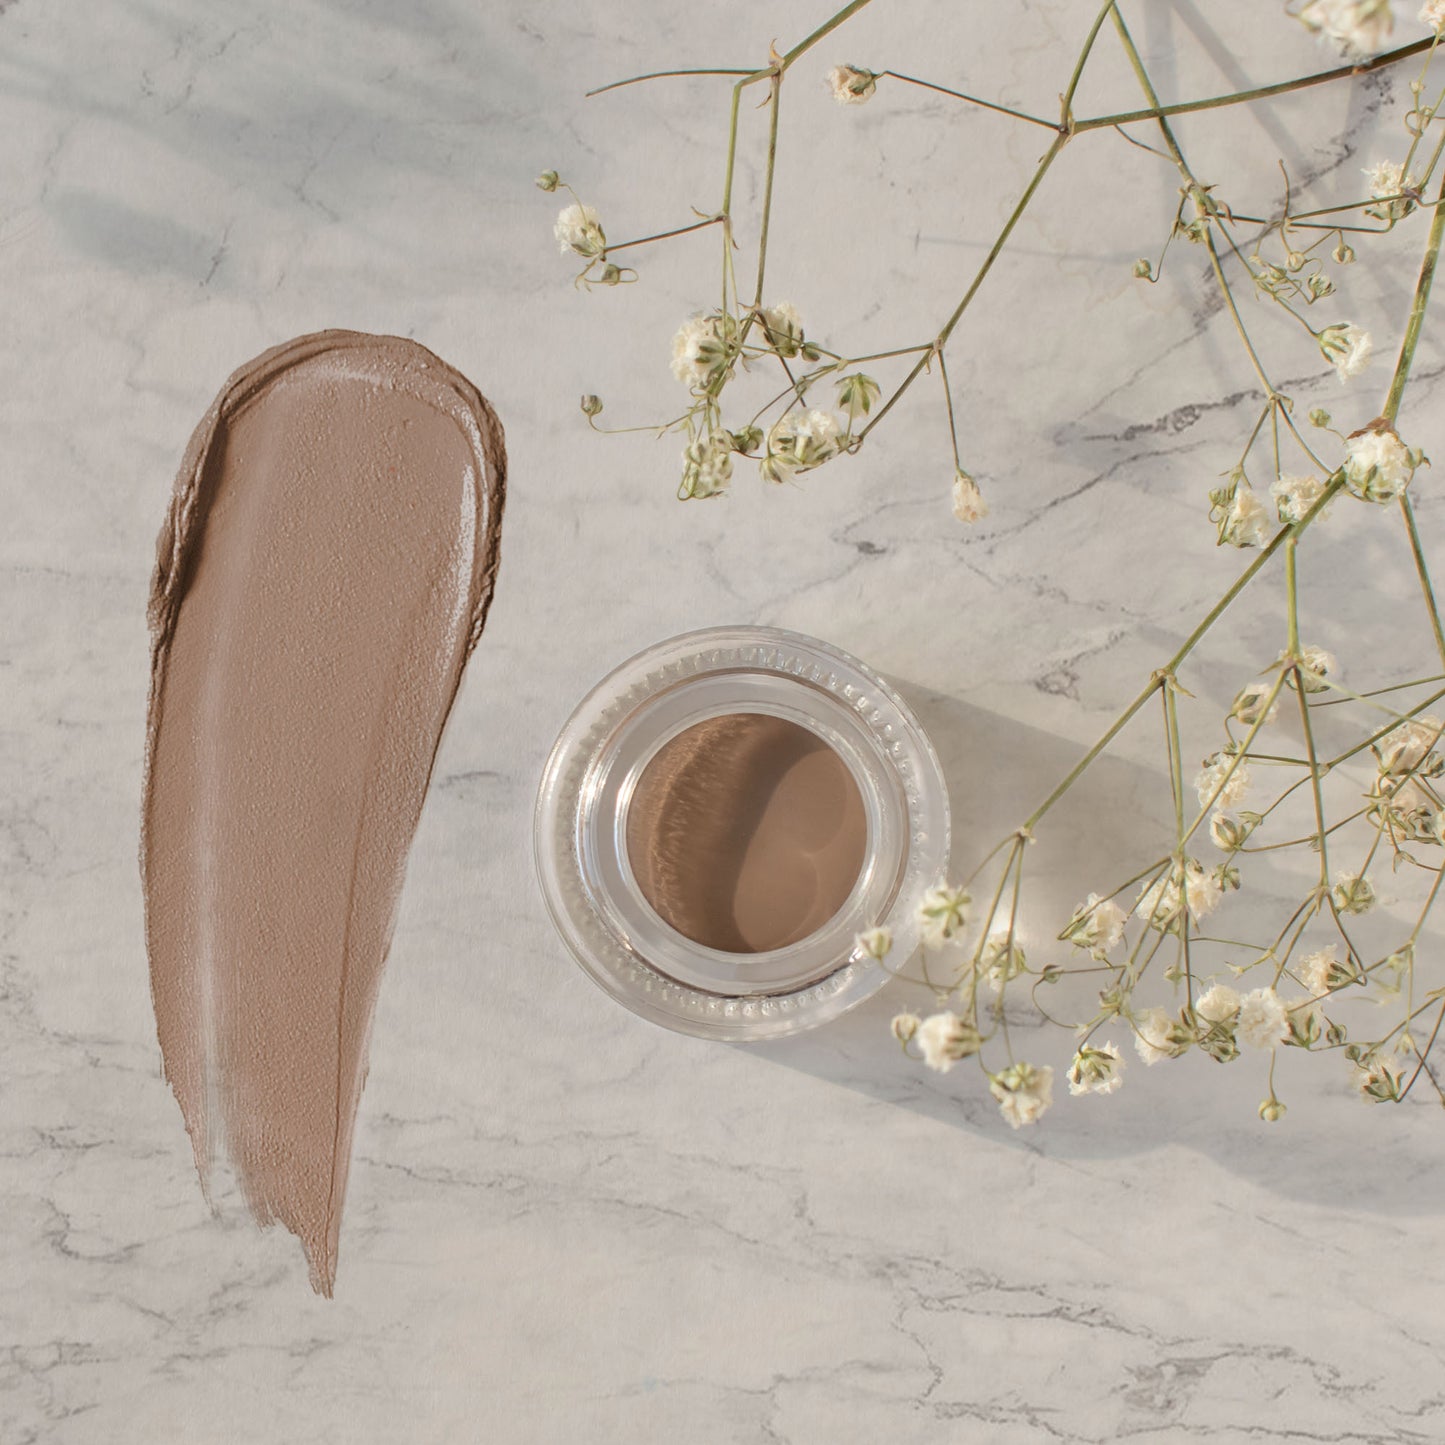 Elevate your brow game with Cruisin Organics' Choco-Latte Brow Pomade. This vegan and cruelty-free formula expertly fills, enhances, and tames brows of all types, while eliminating parabens and fragrance for a defined and healthy look.